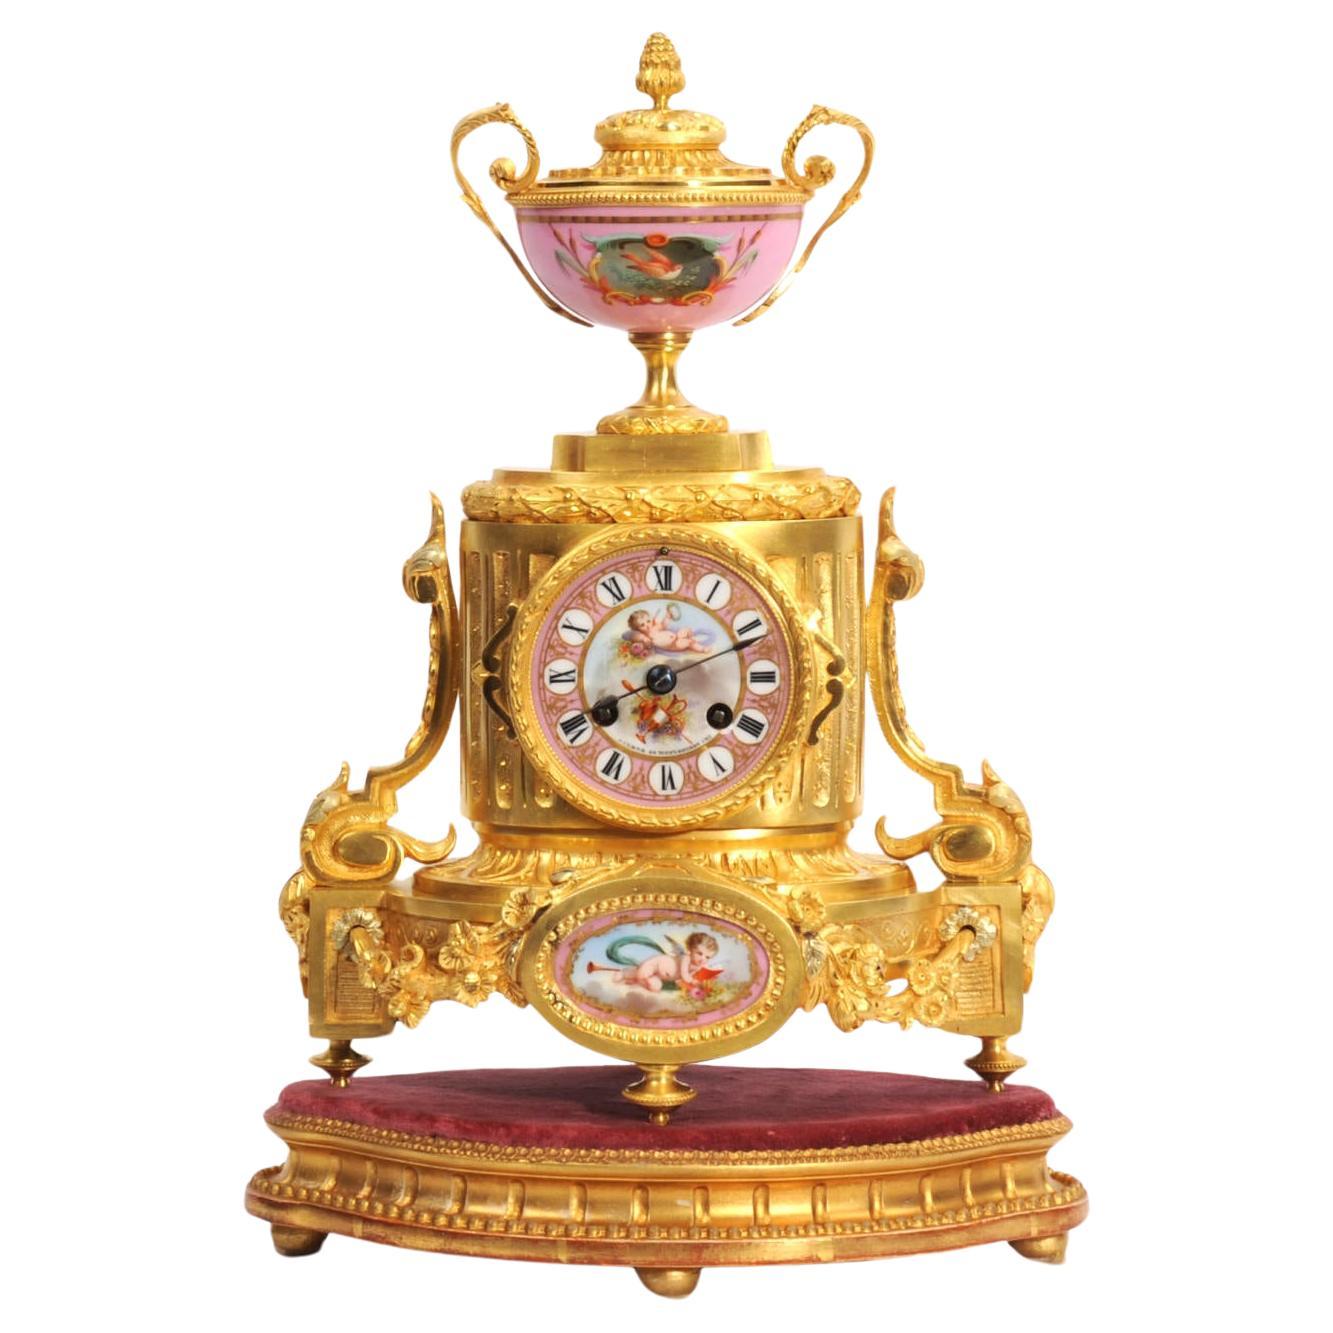 Ormolu and Sevres Porcelain Antique French Clock by Achille Brocot